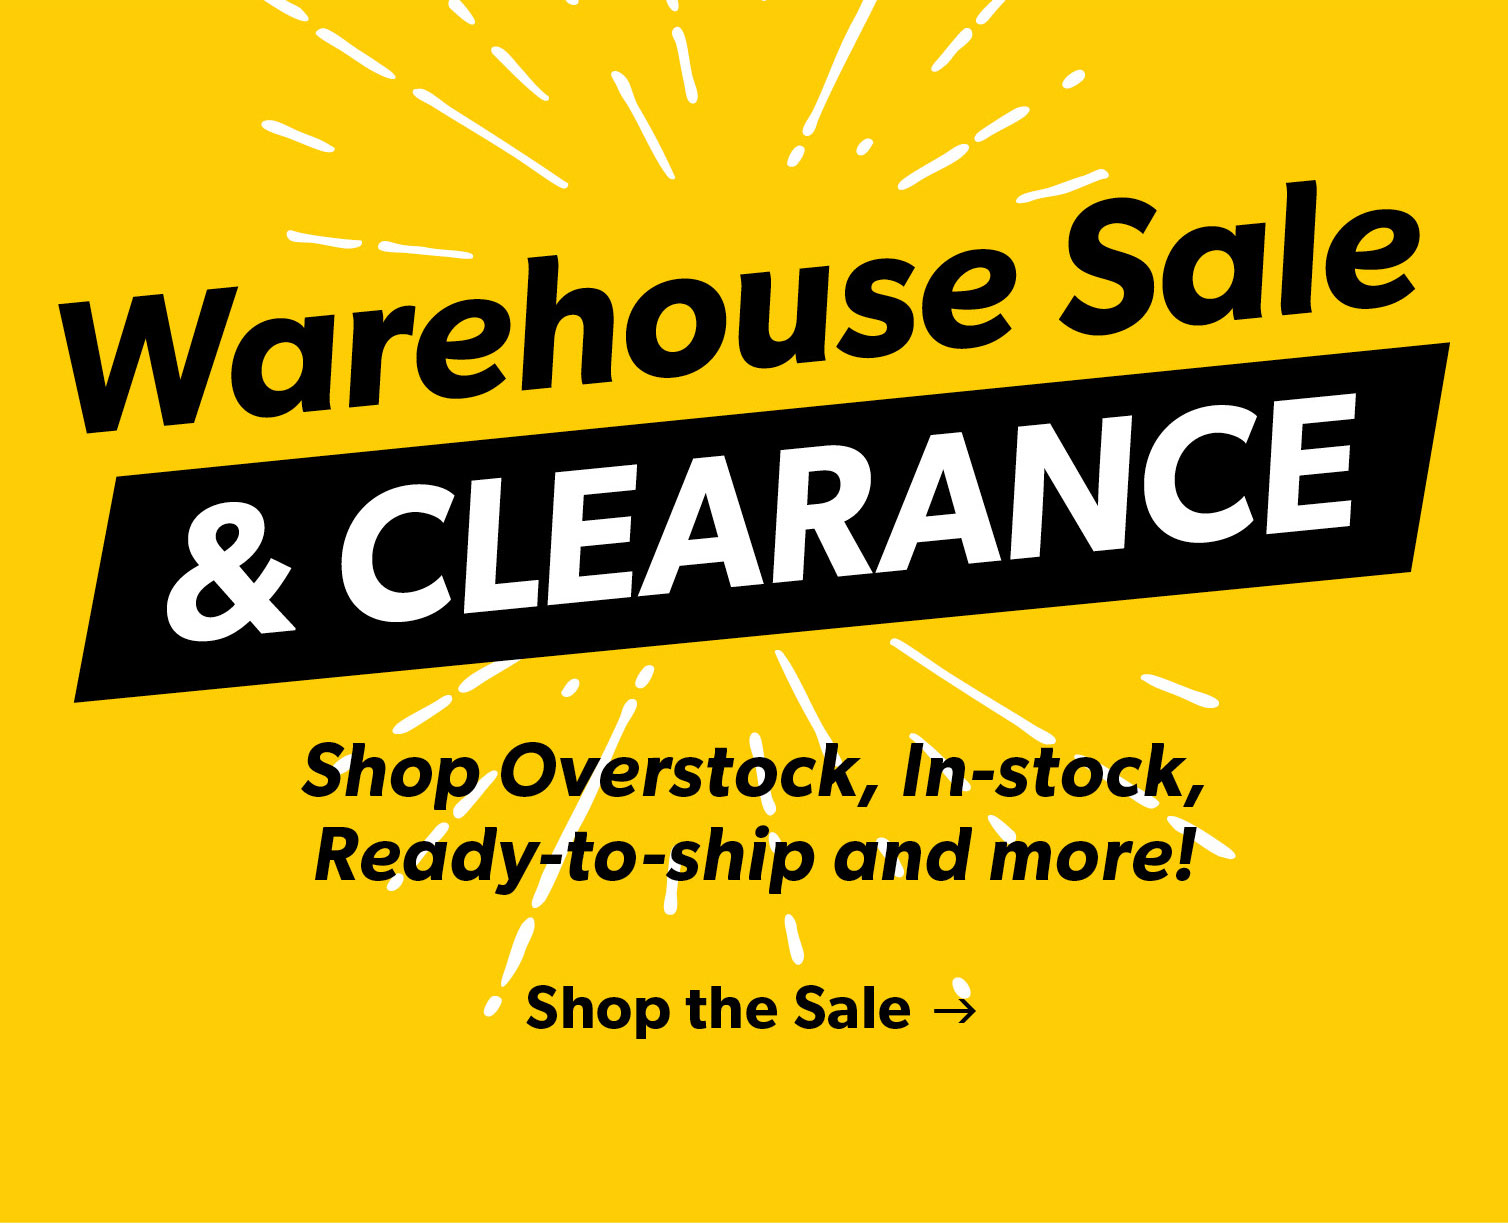 Warehouse Sale and Clearance. Shop Overstock, In-stock, Ready-to-ship and more!. Click to Shop the Sale.